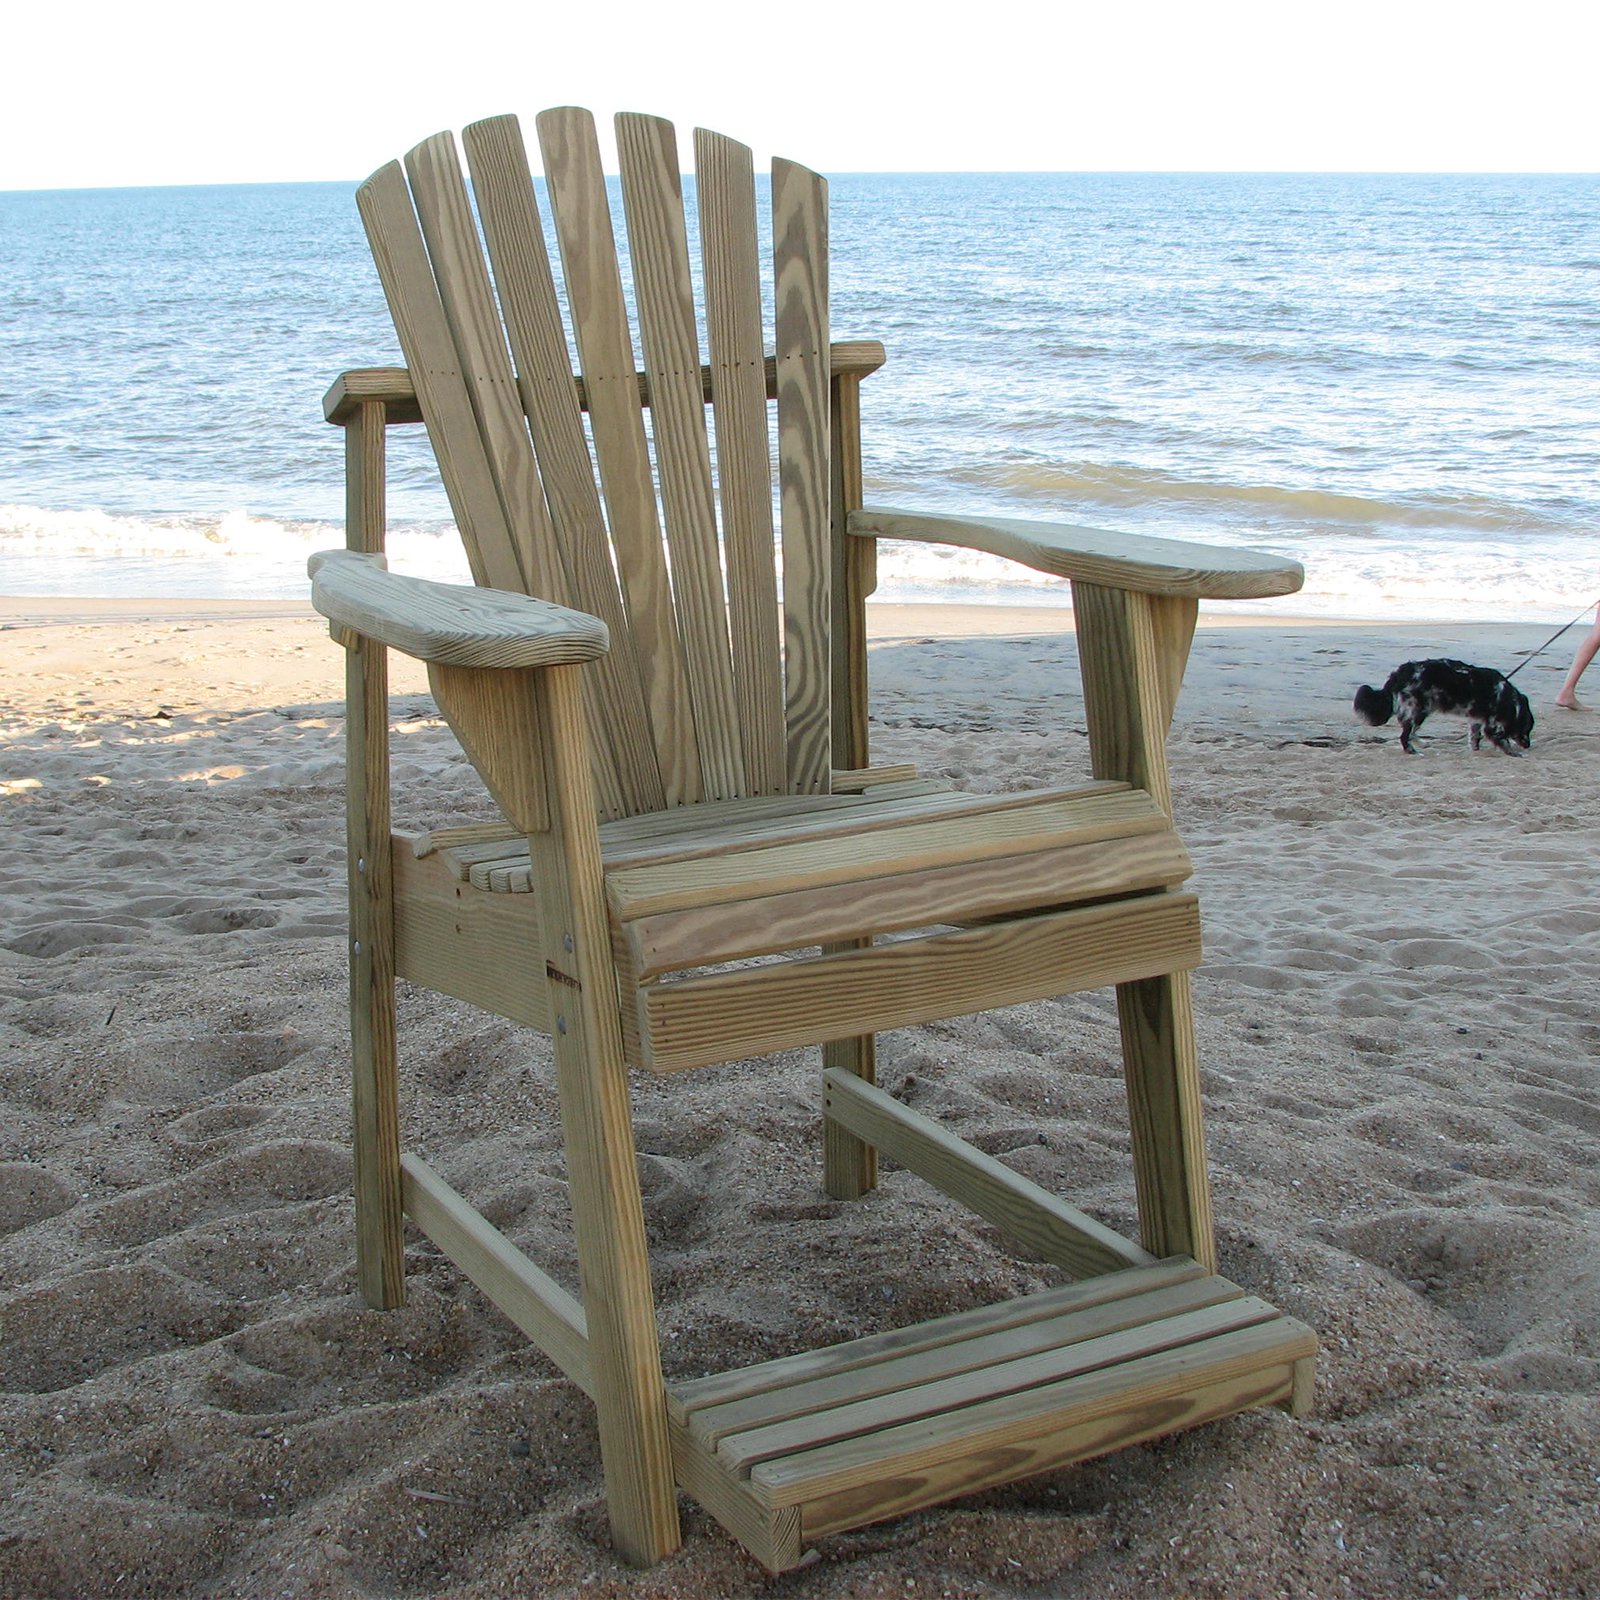 Weathercraft Designers Choice Treated Balcony Adirondack Chair with Footrest - Natural - image 1 of 8